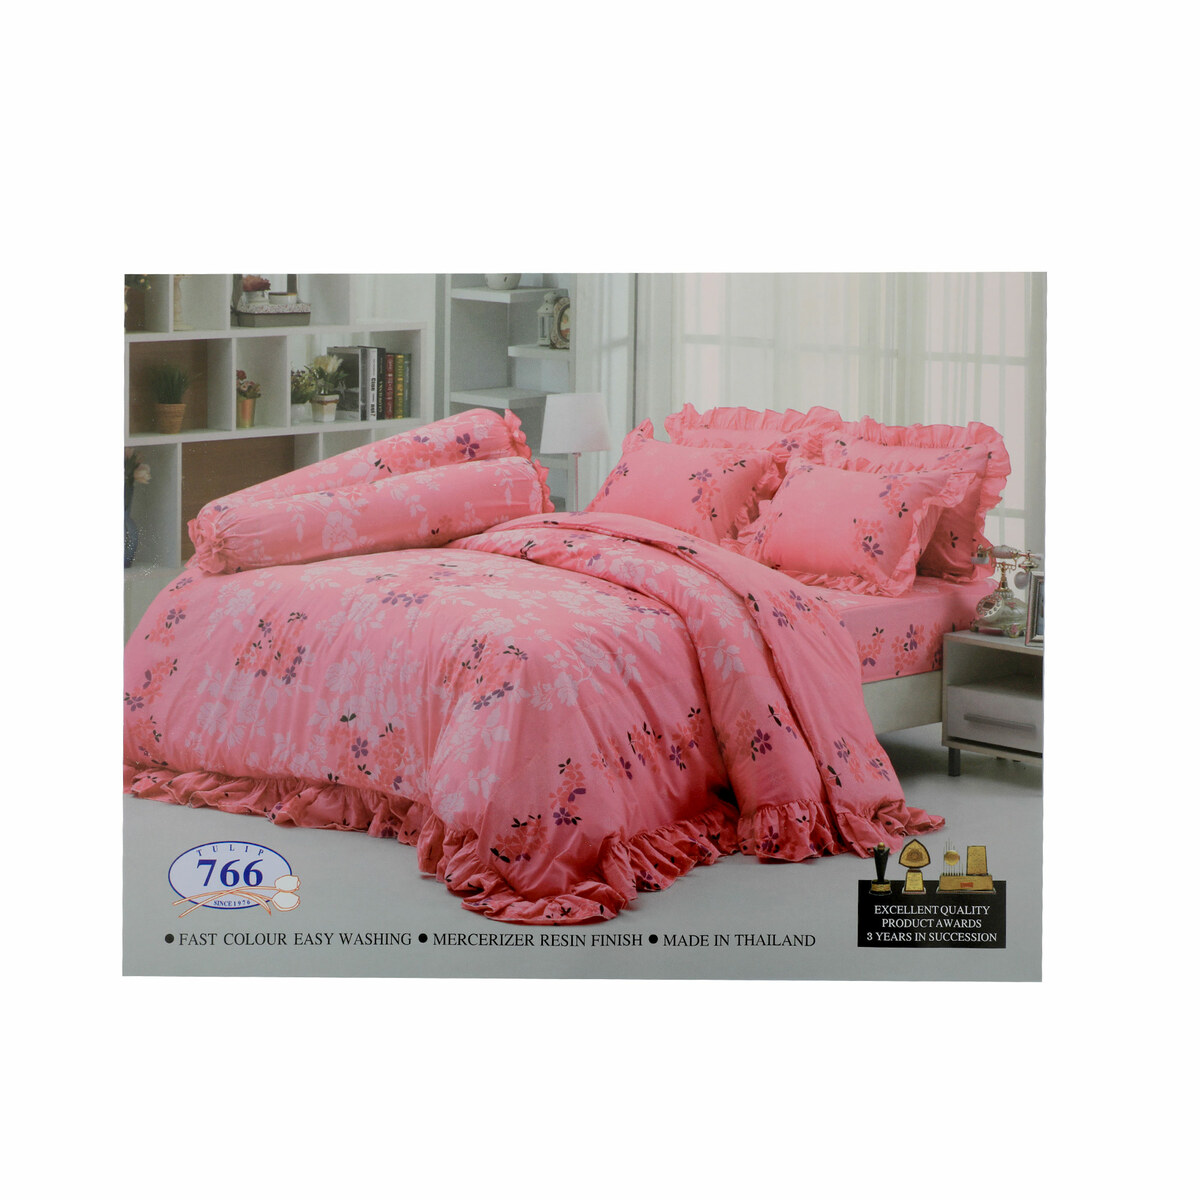 Tulip Bed Sheet - Single Assorted